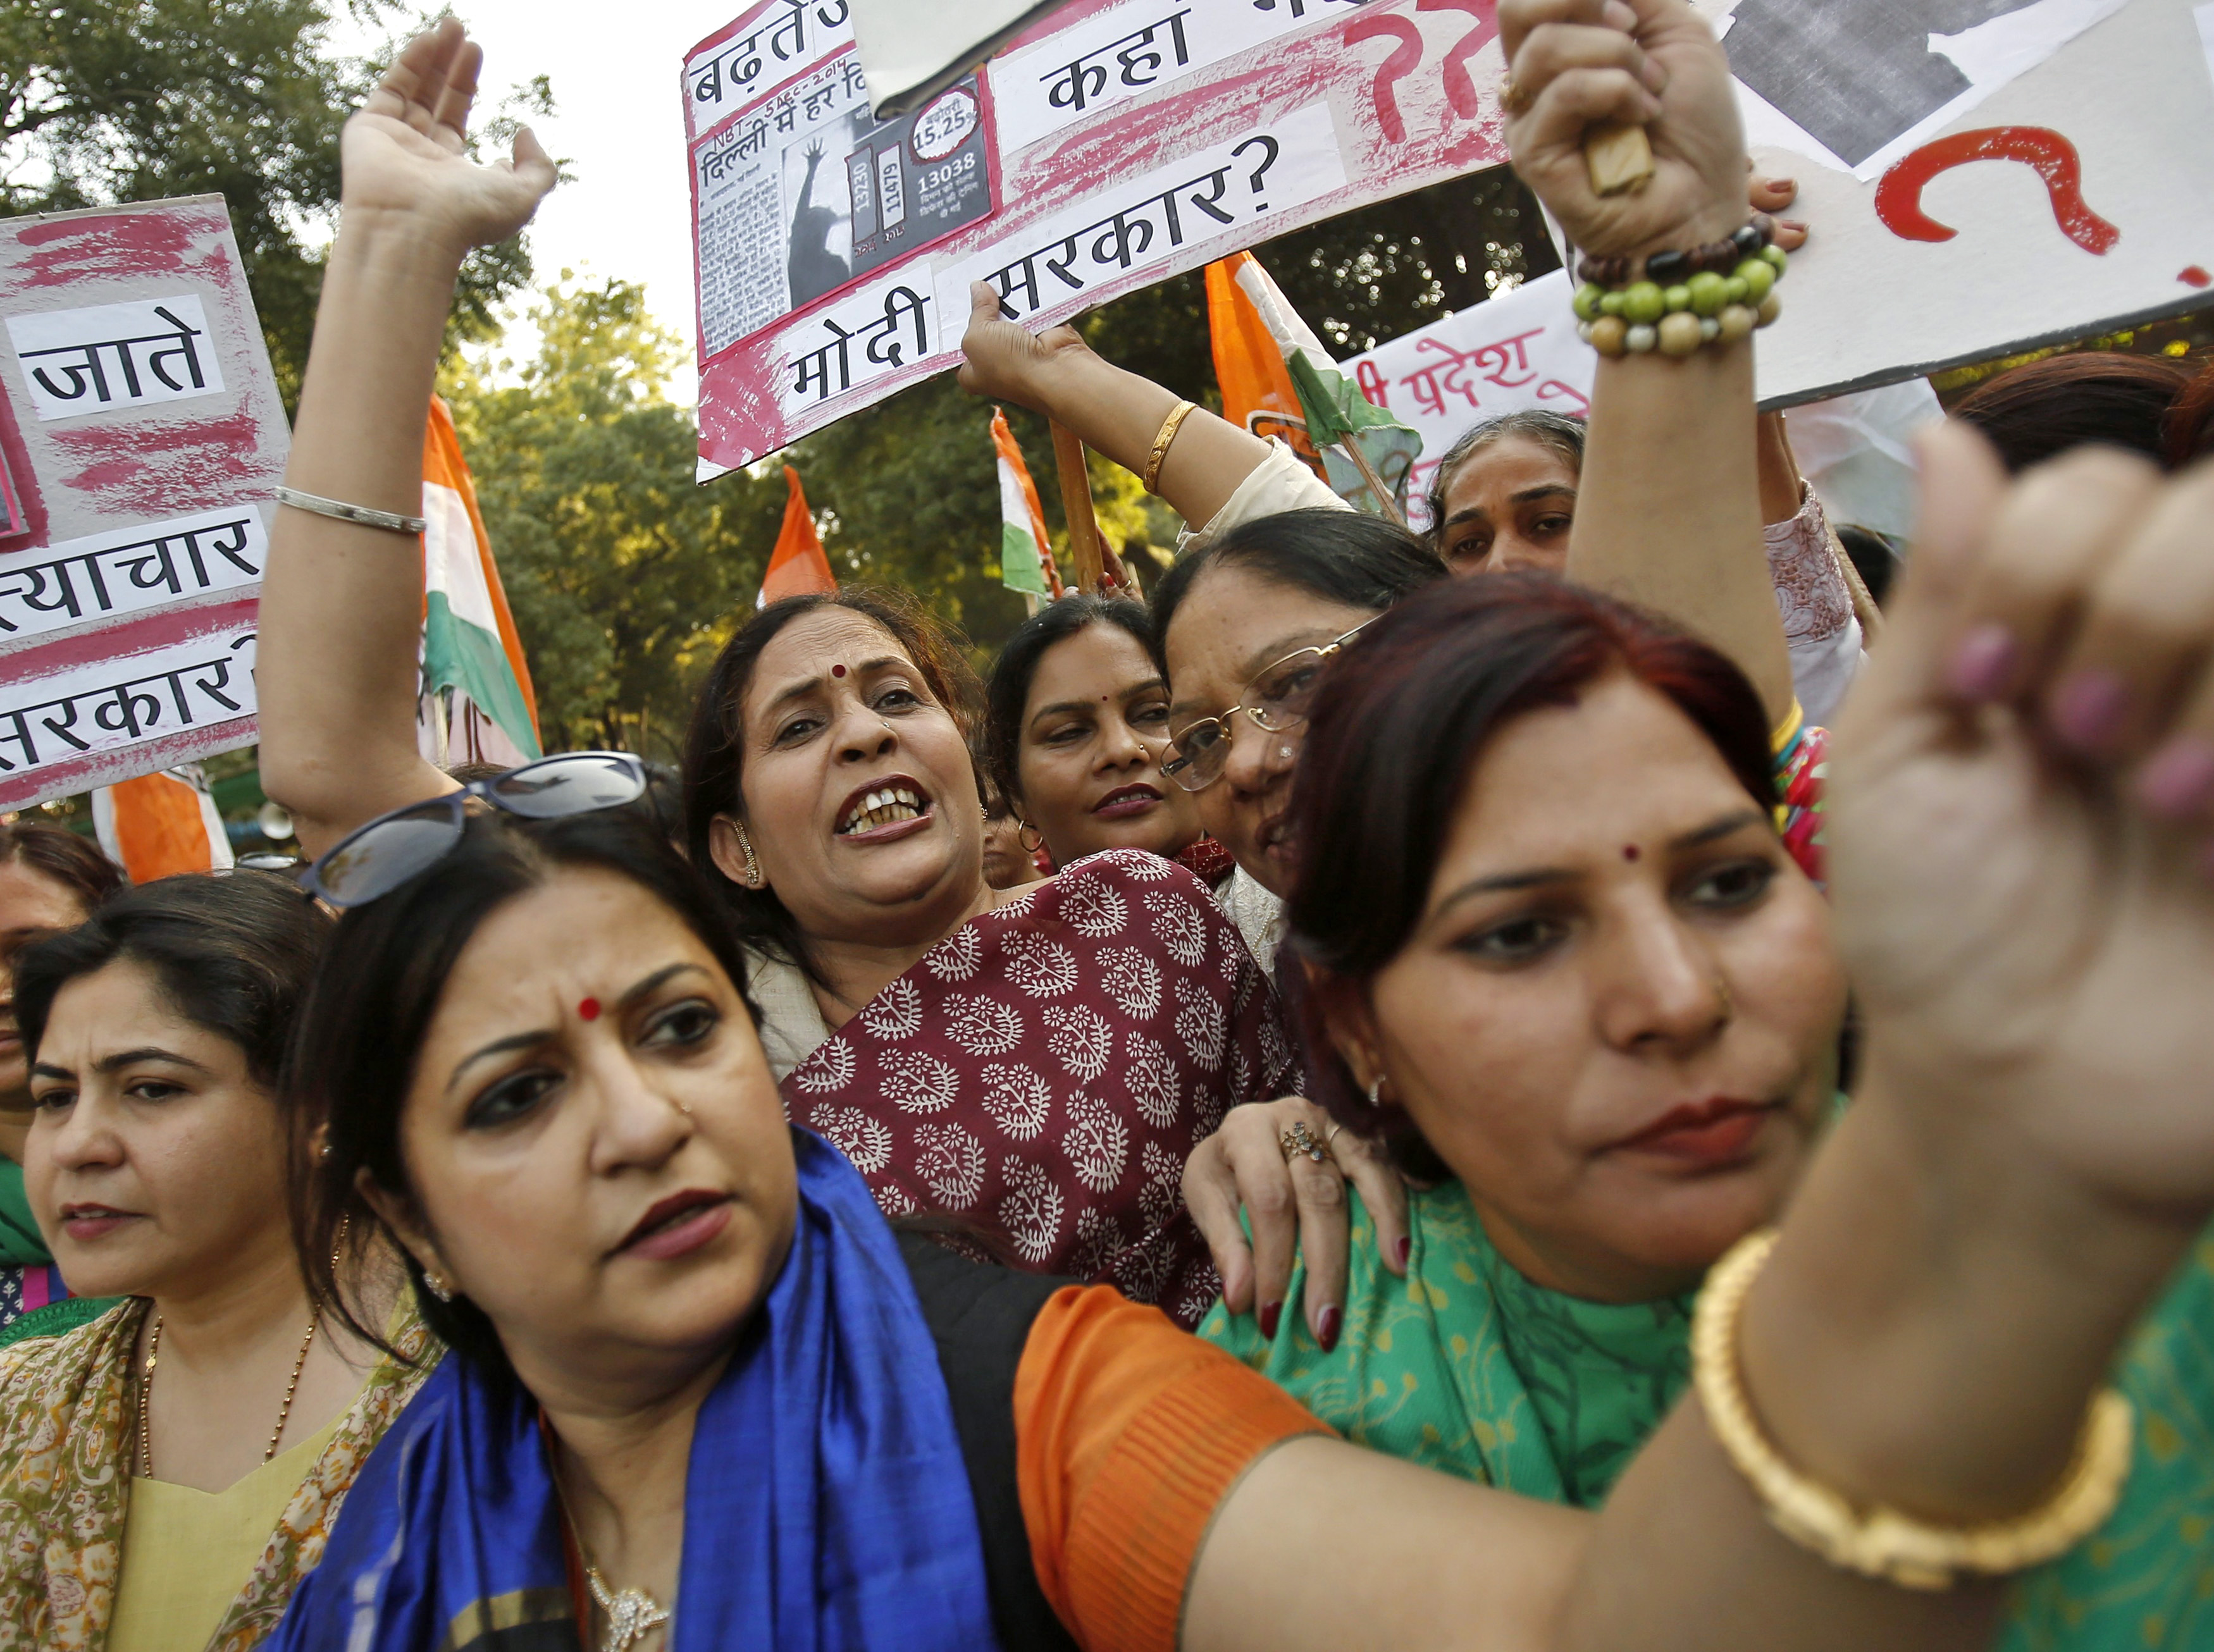 Members of All India Mahila Congress, women's wing of Congress party, shout slogans and carry placards during a protest against the rape of a female Uber passenger in New Delhi on Dec. 8, 2014 (Anindito Mukherjee—Reuters)